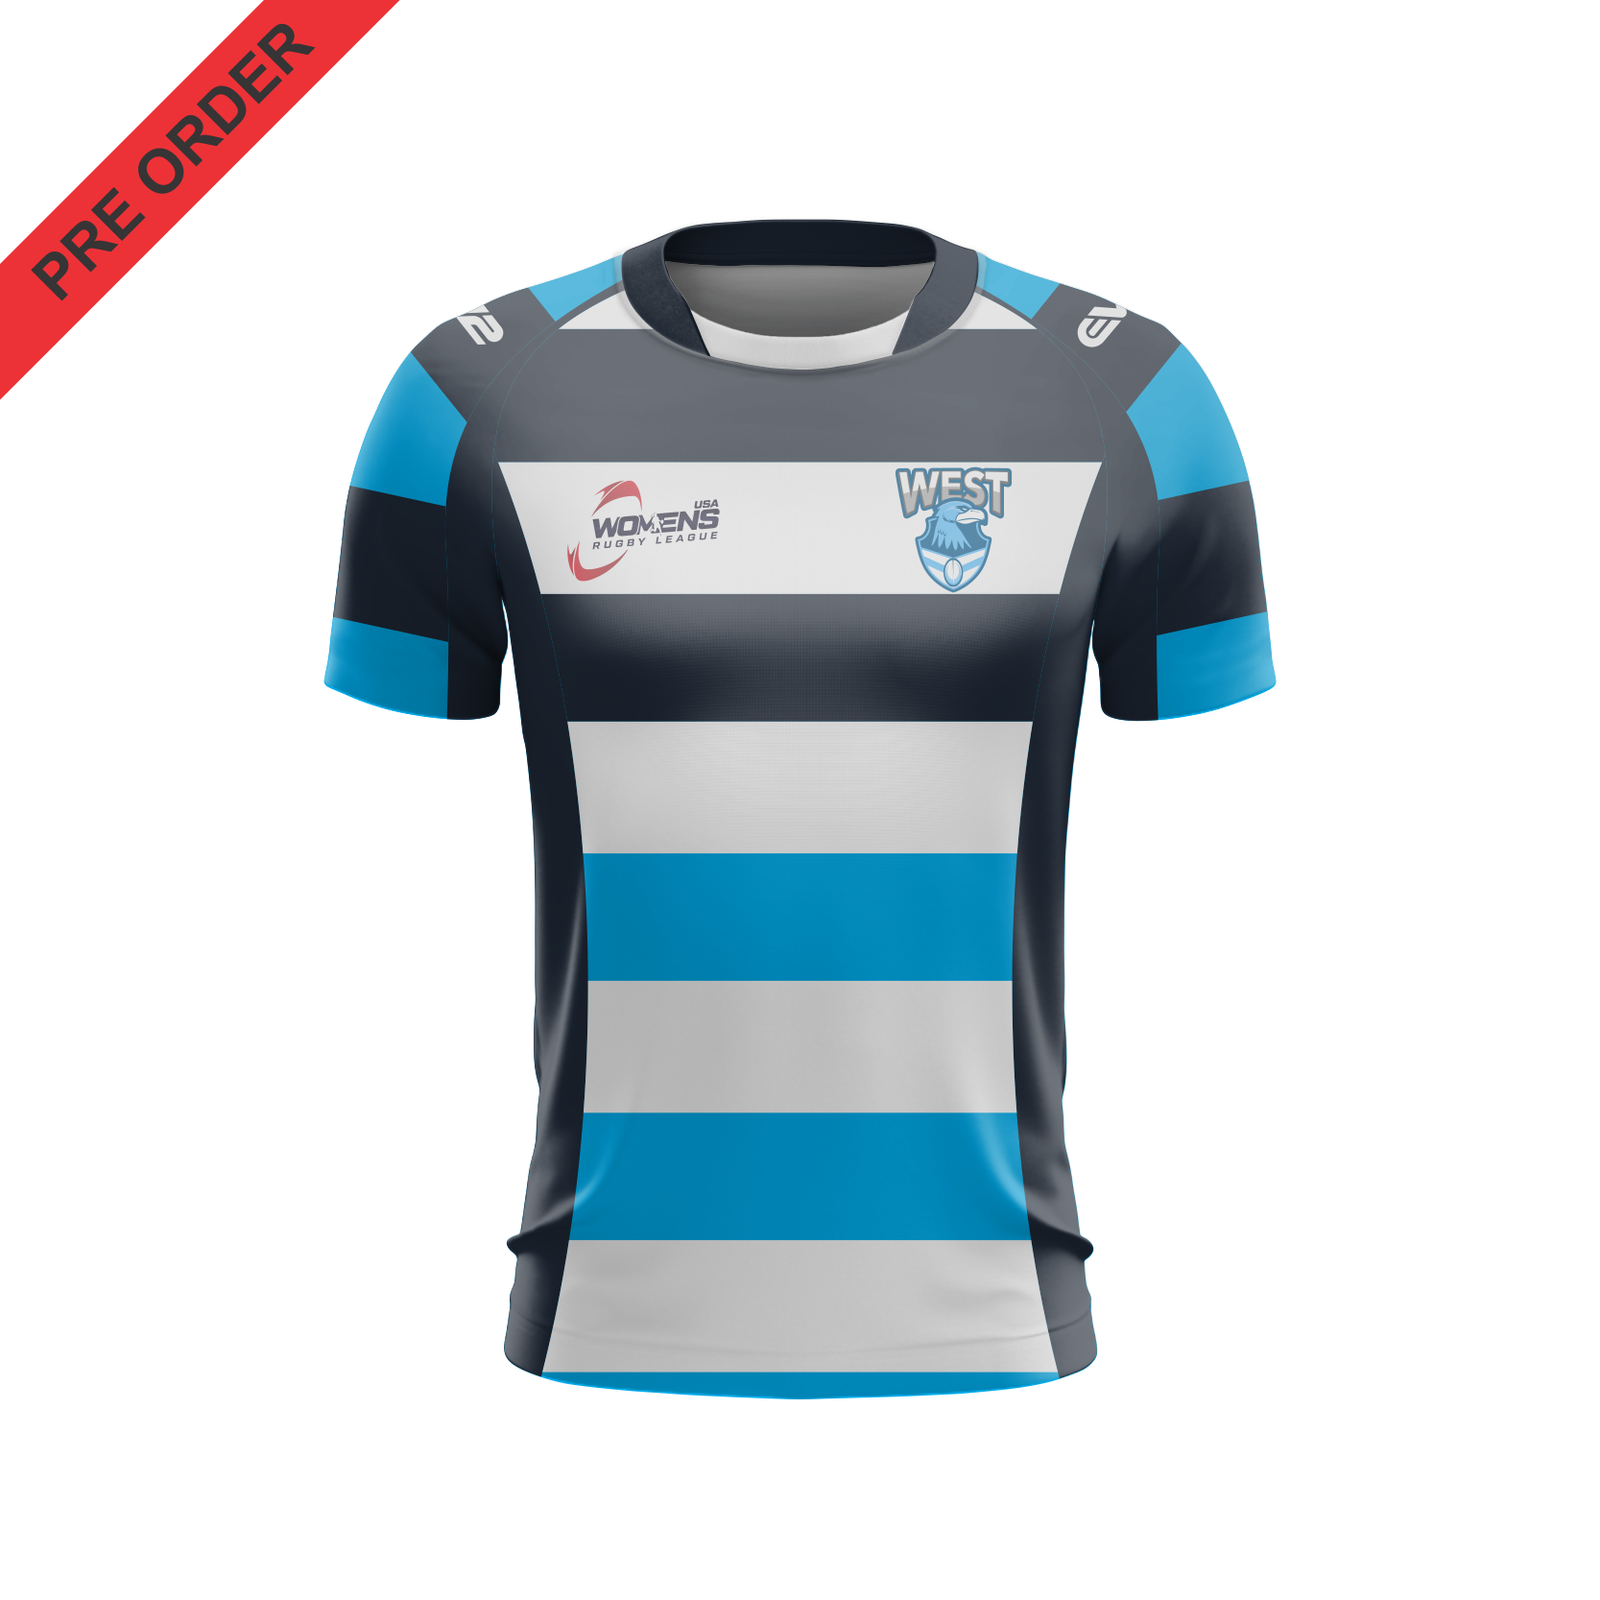 Wests Rugby League - Nines Jersey